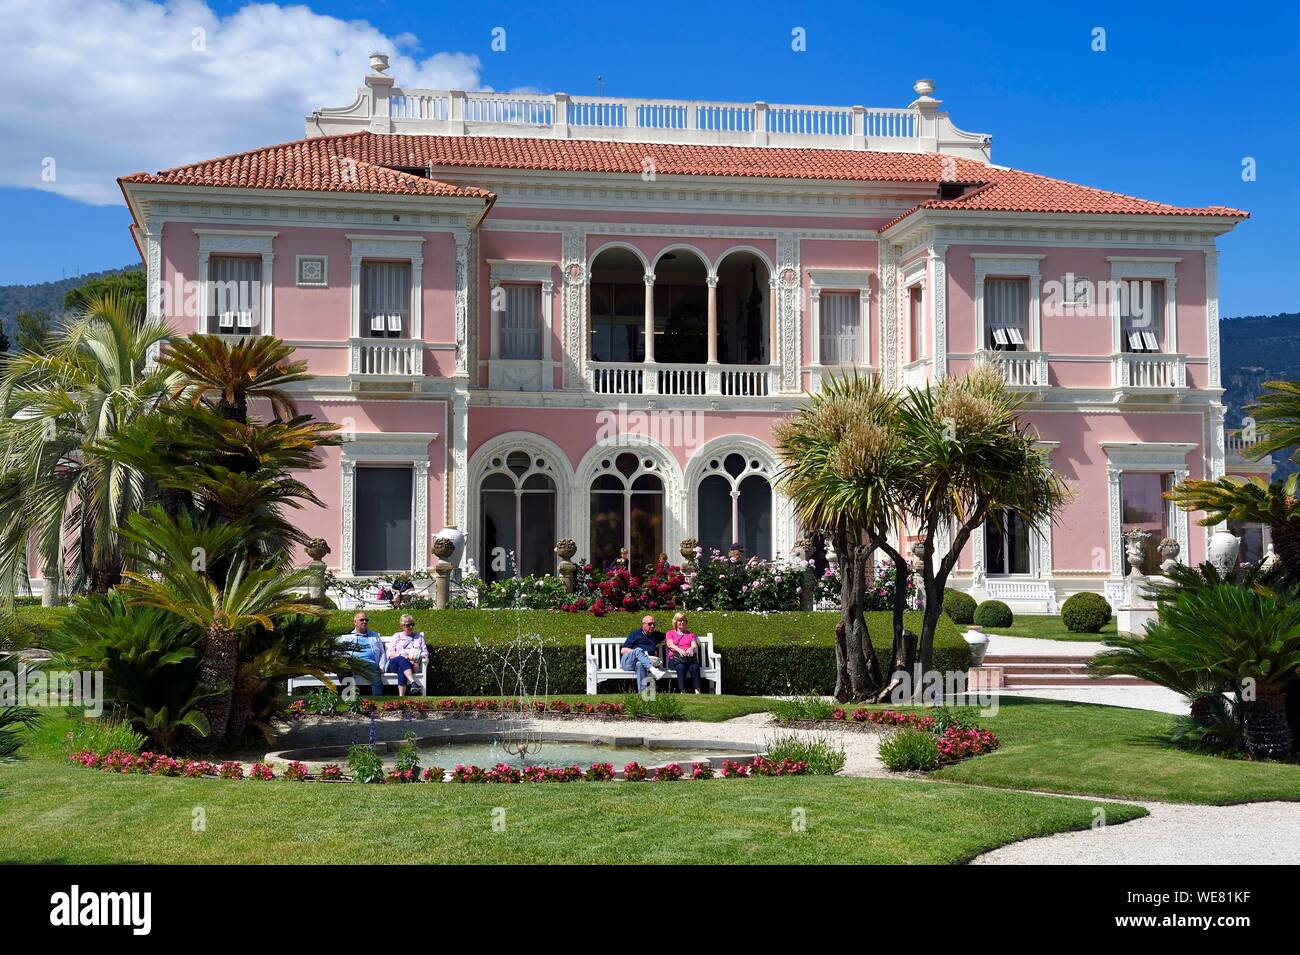 France, Alpes Maritimes, Saint Jean Cap Ferrat, Ephrussi de Rothschild villa and garden, large pond and water jets in the French garden Stock Photo